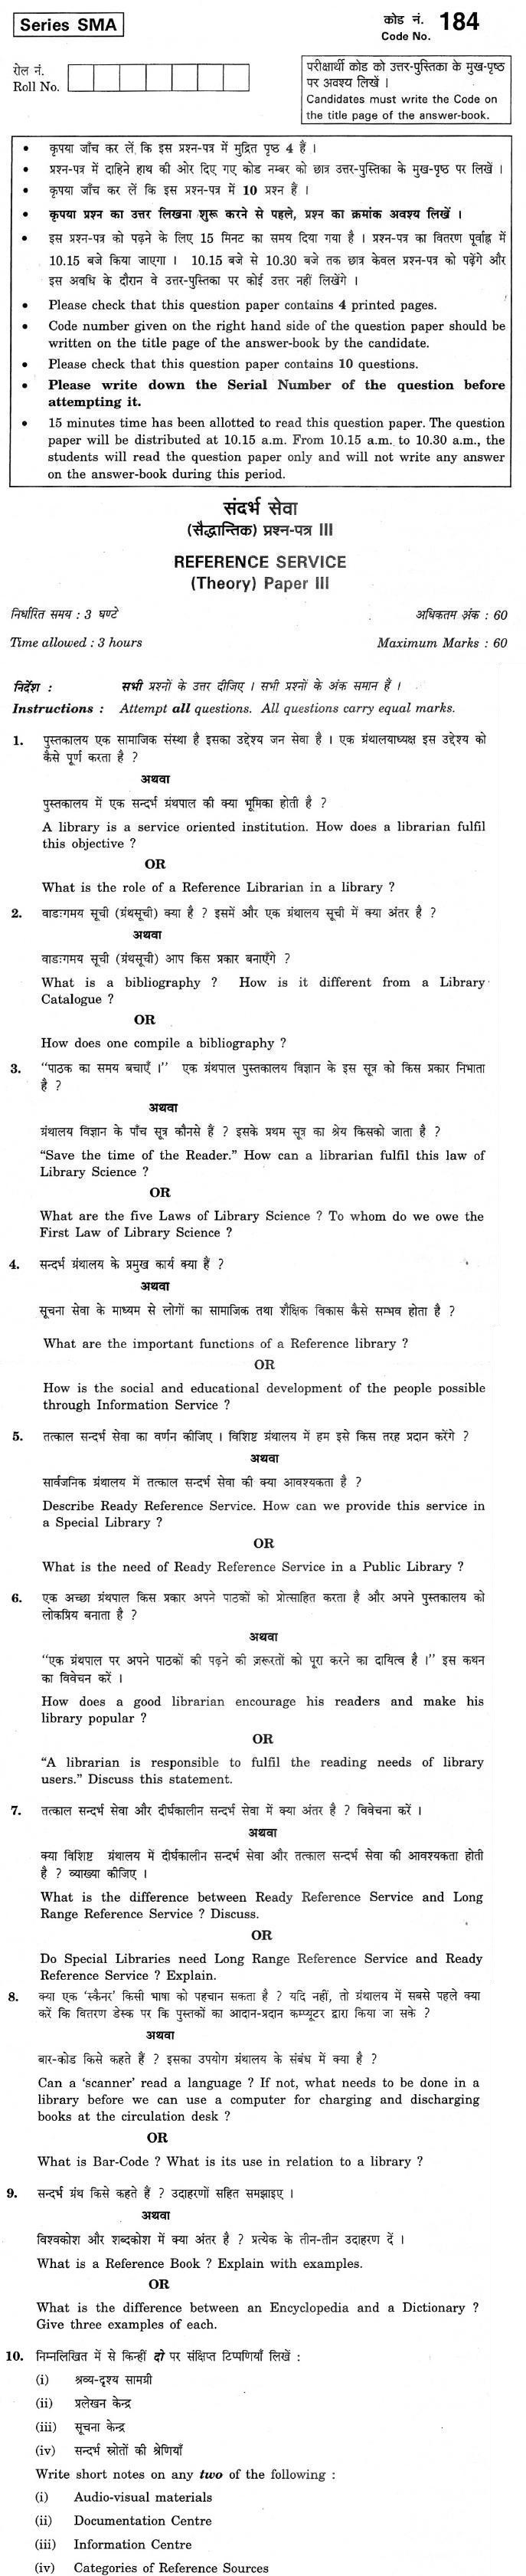 CBSE Class XII Previous Year Question Paper 2012 Reference Service Paper III